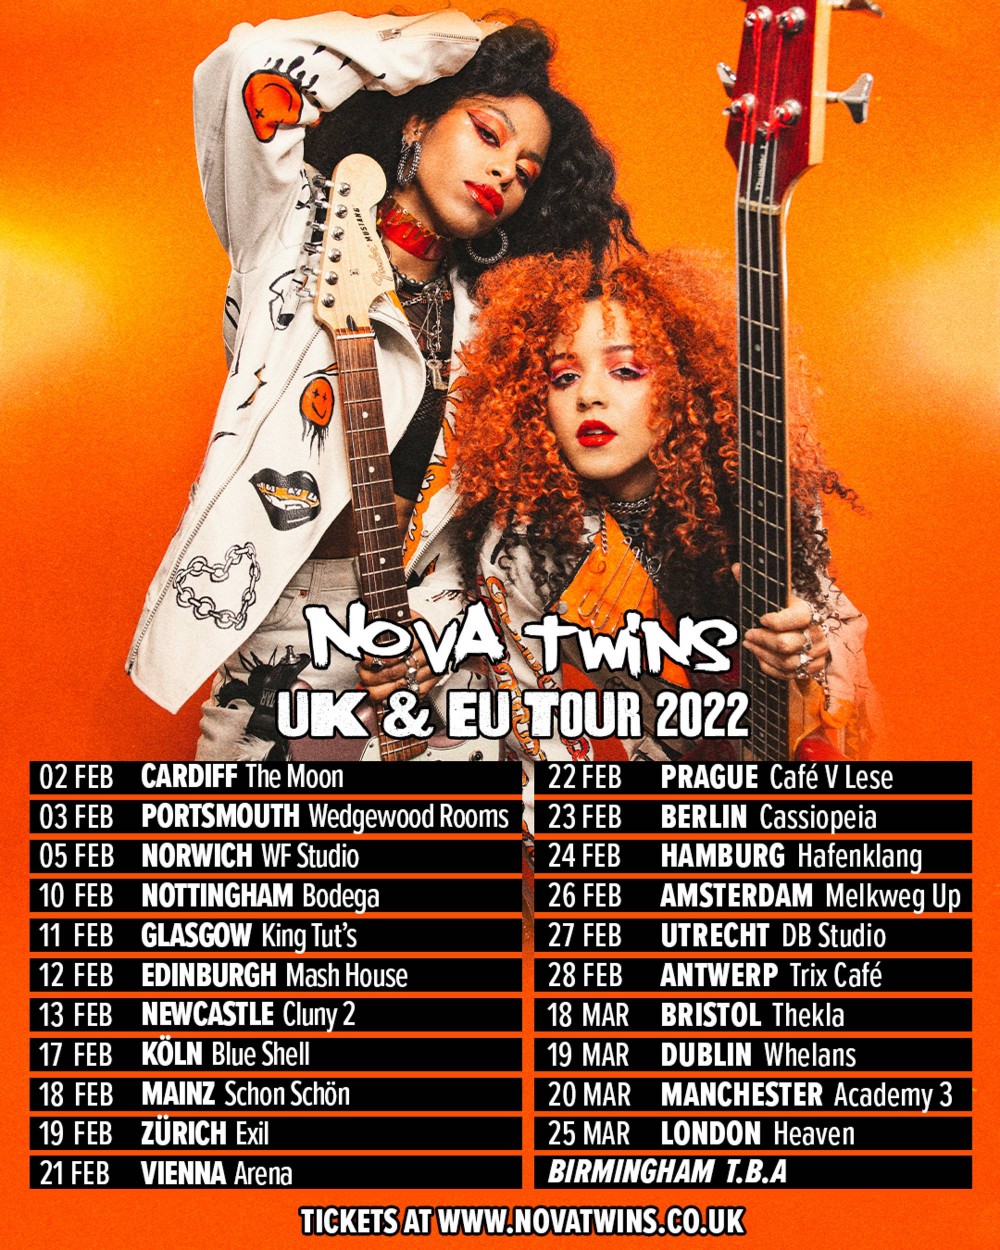 Nova Twins have announced details of a 2022 UK and European tour